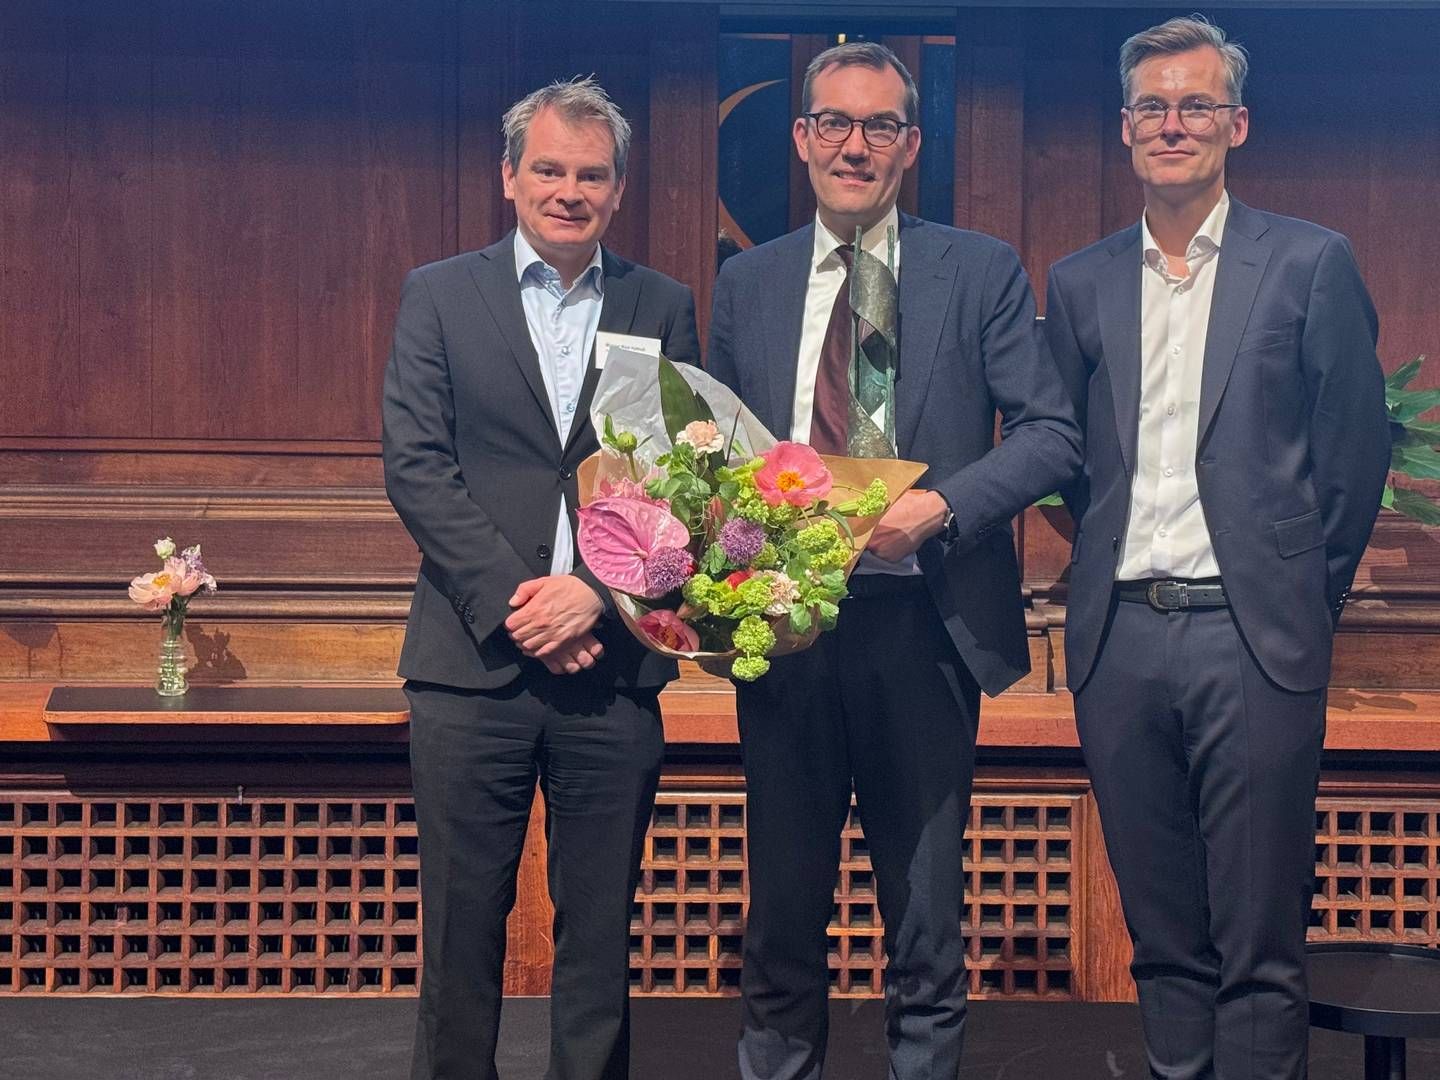 Daniel Bohsen (in the middle), CVP & Head of Investor Relations at Novo Nordisk, accepted the Information Prize, which was presented by Michael West Hybholt (left) and Carsten Lønborg Madsen from Finansforeningen's Accounting Committee. | Foto: Luke Brooke